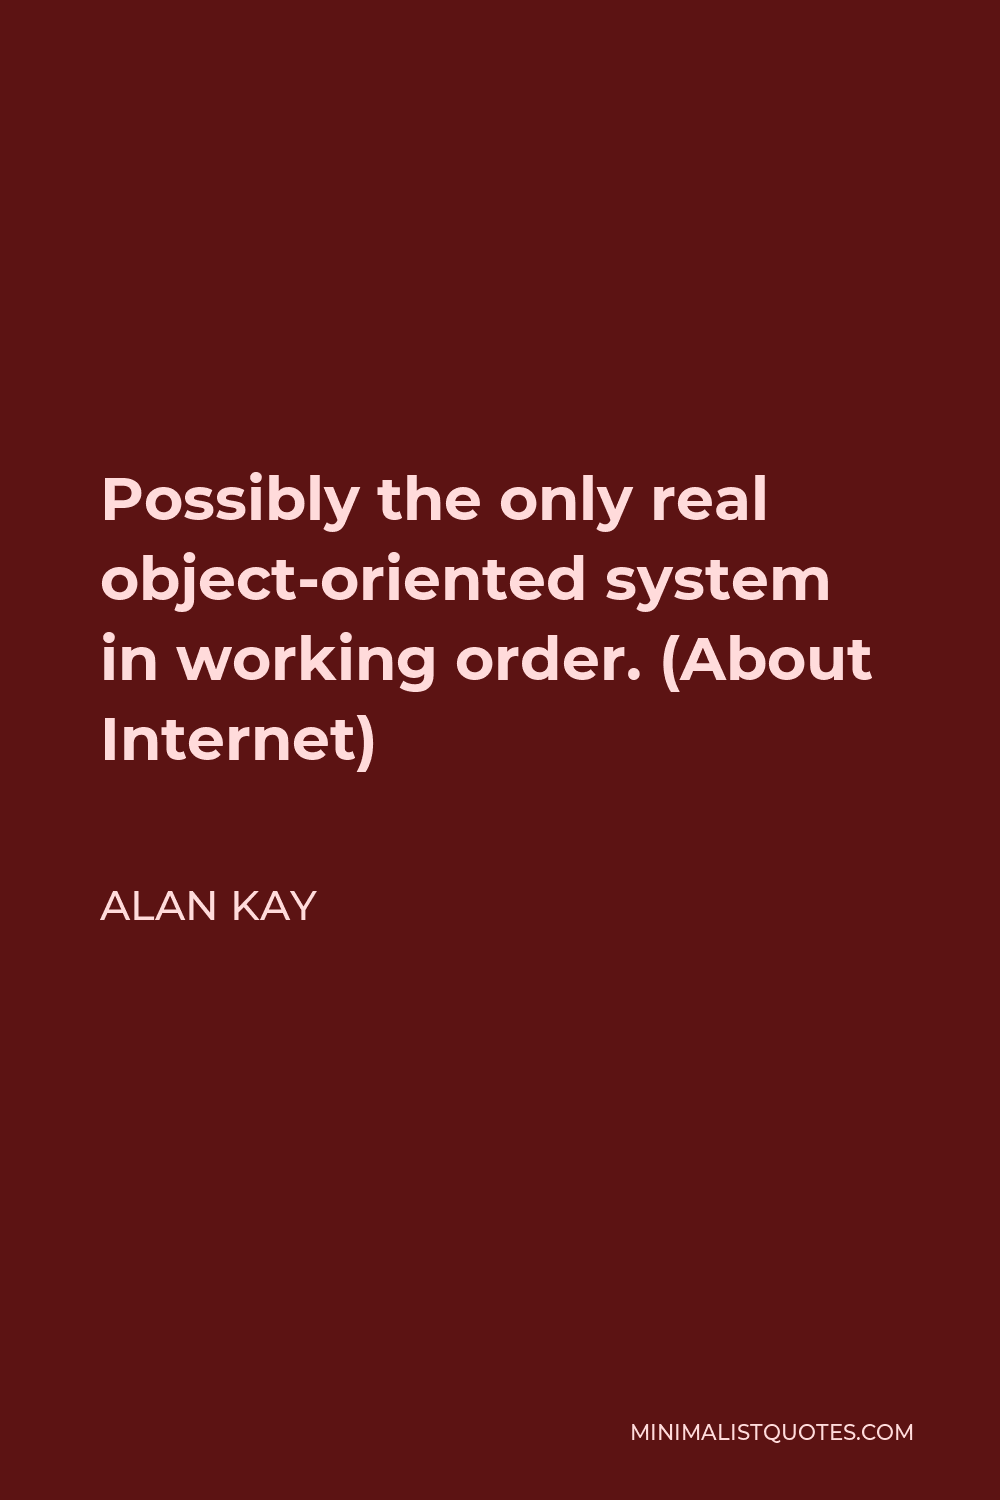 Alan Kay Quote - Possibly the only real object-oriented system in working order. (About Internet)